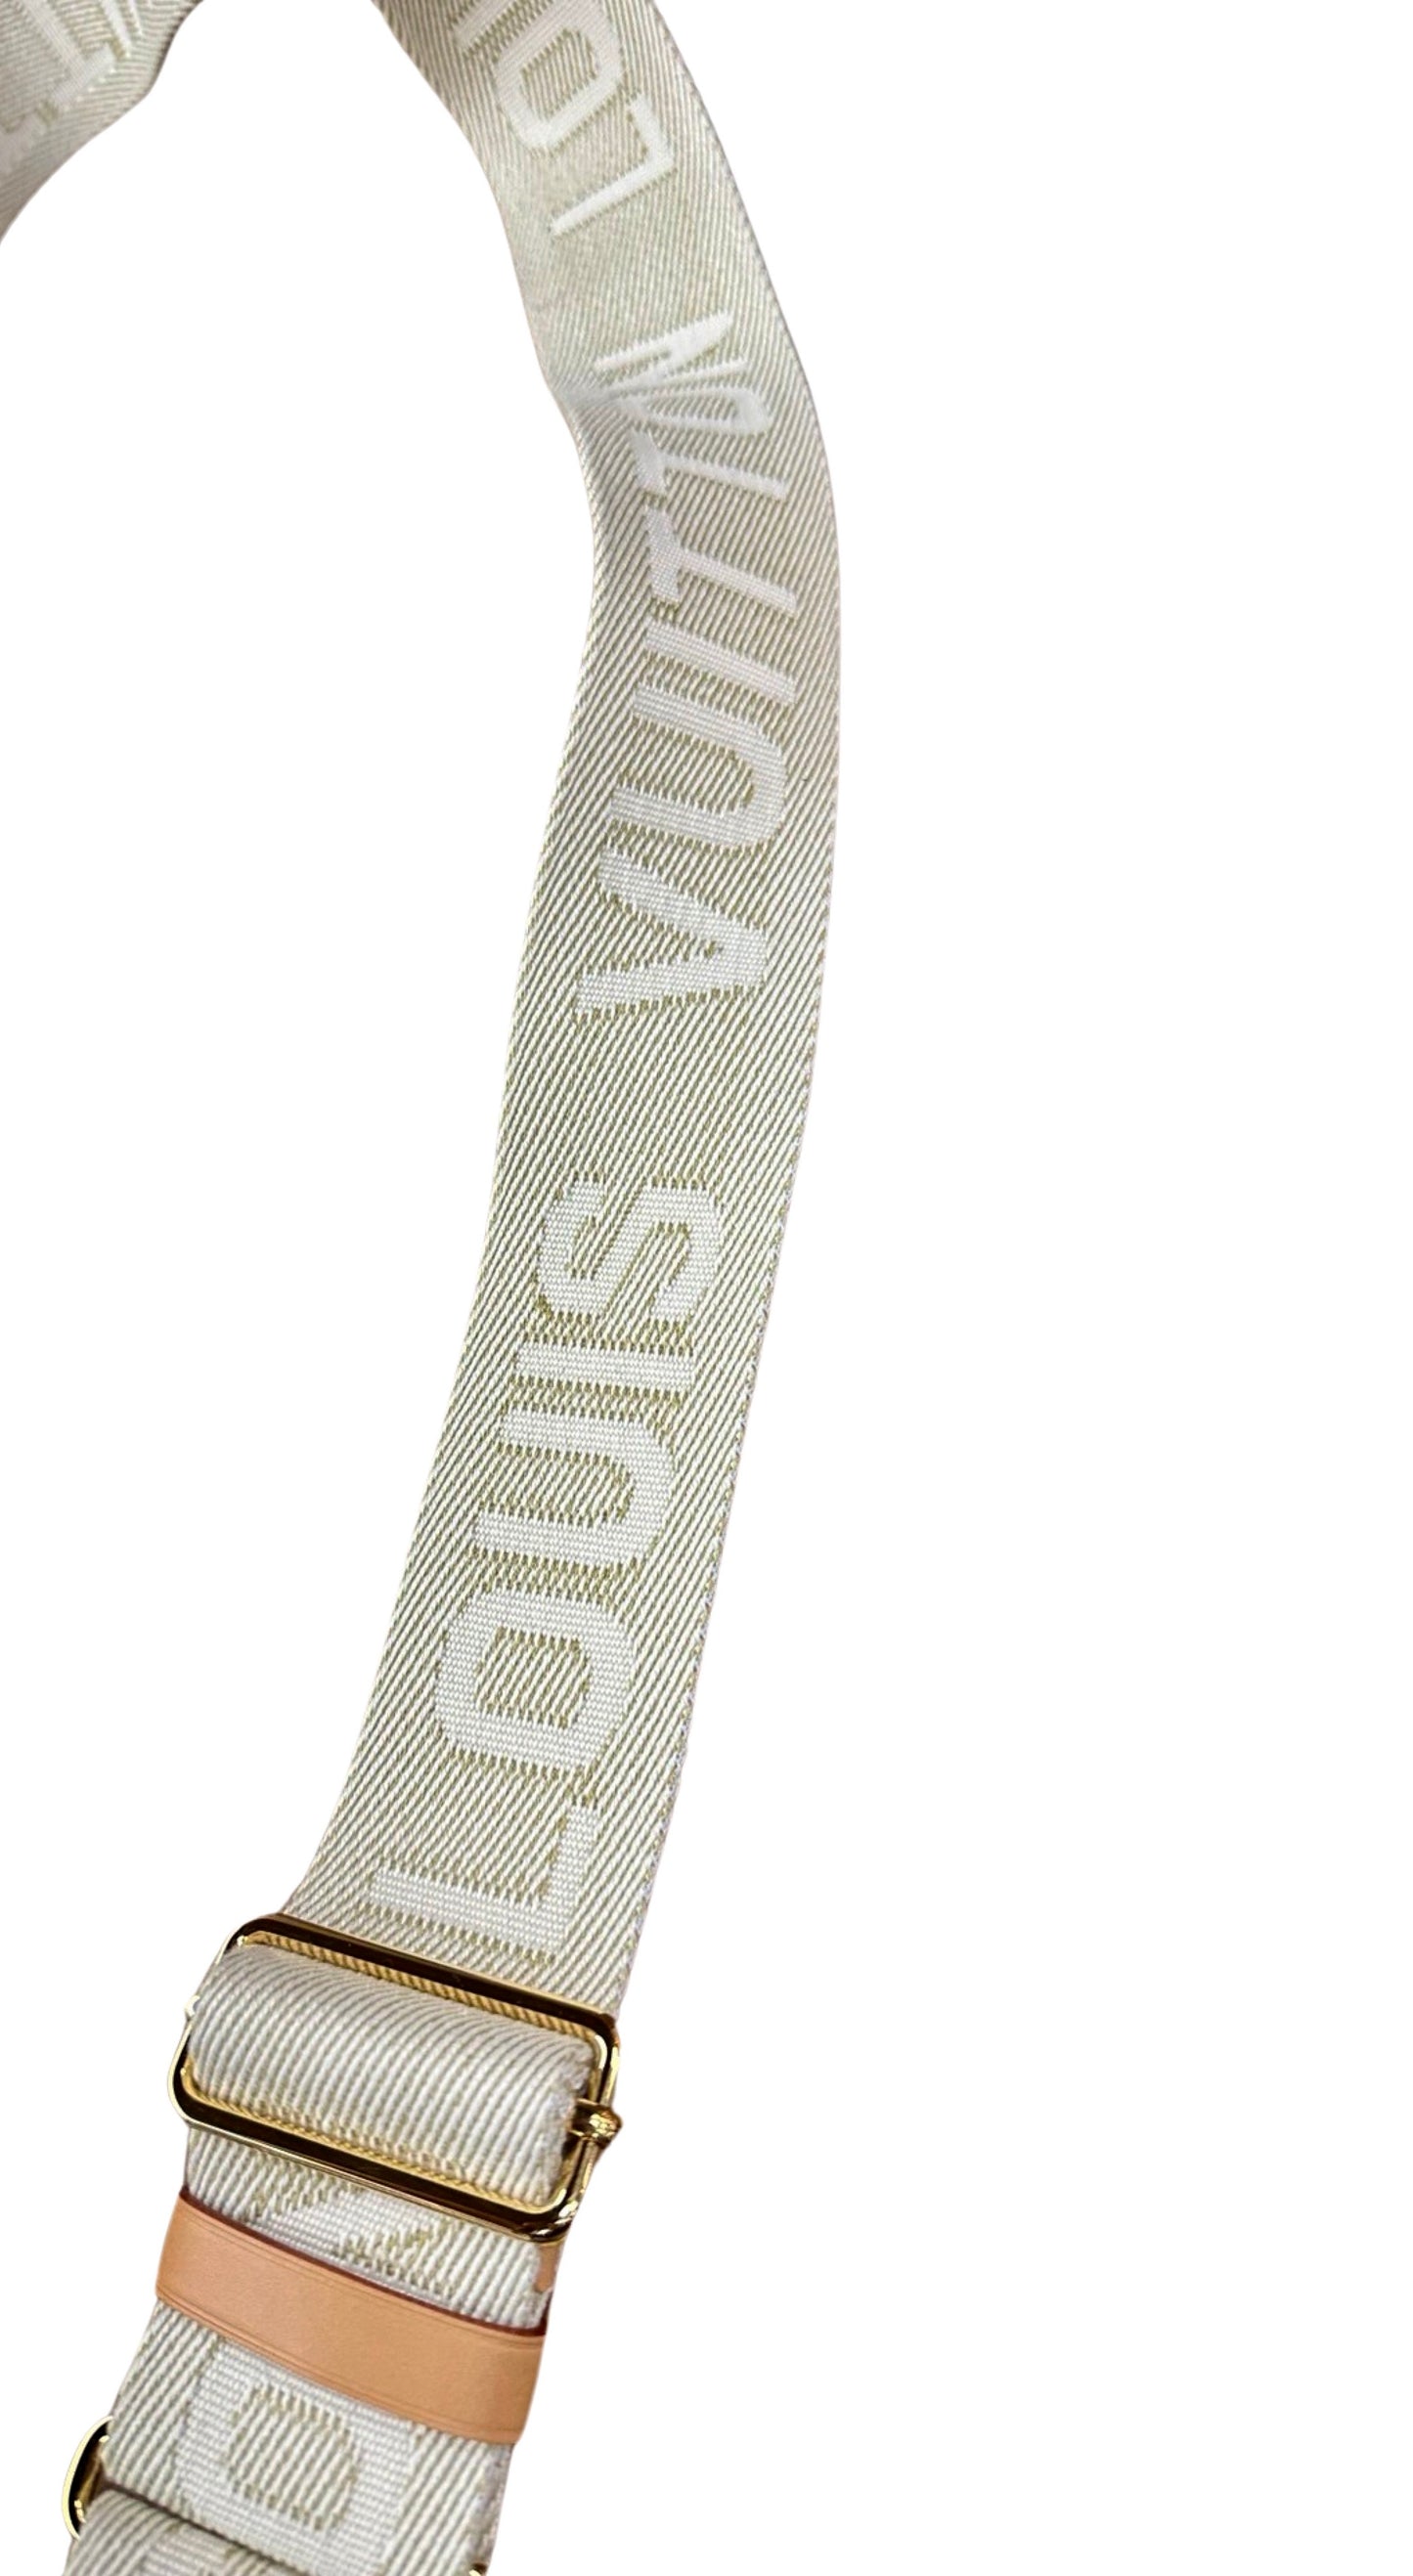 Fabric strap with Louis Vuitton in big print on it